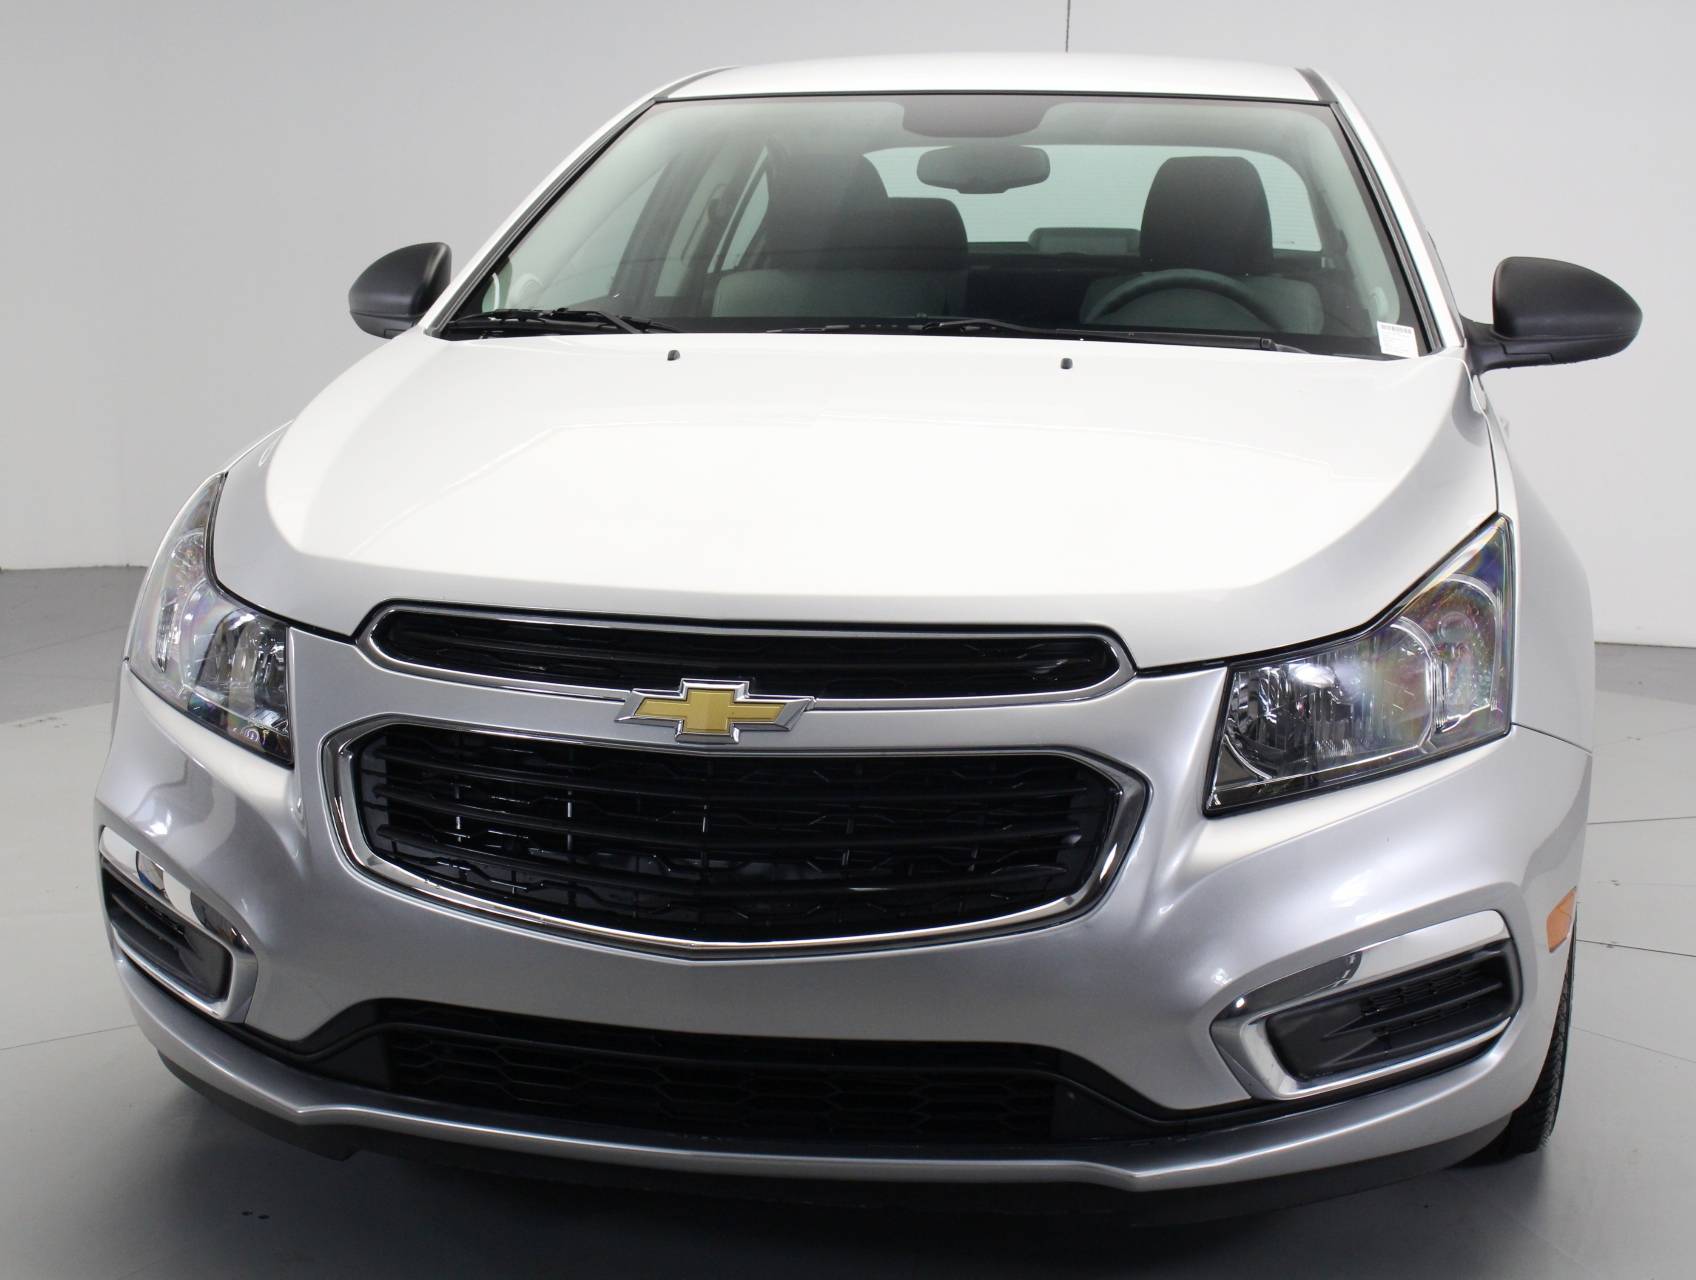 Florida Fine Cars - Used CHEVROLET CRUZE 2015 WEST PALM 1LS